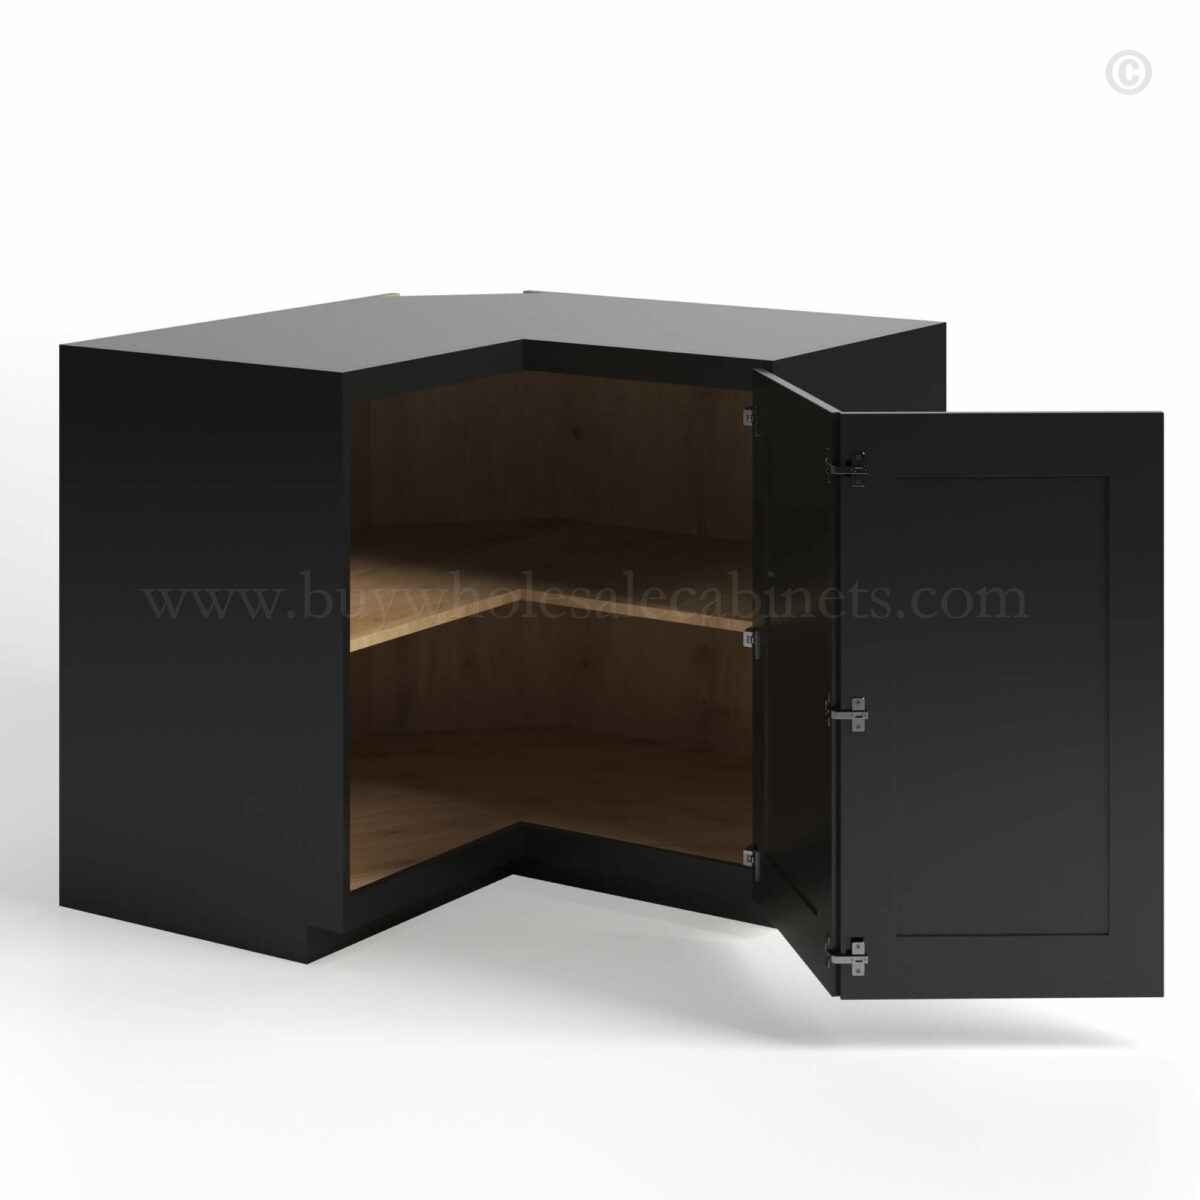 Black Shaker Wall Easy Reach Cabinet, rta cabinets, wholesale cabinets